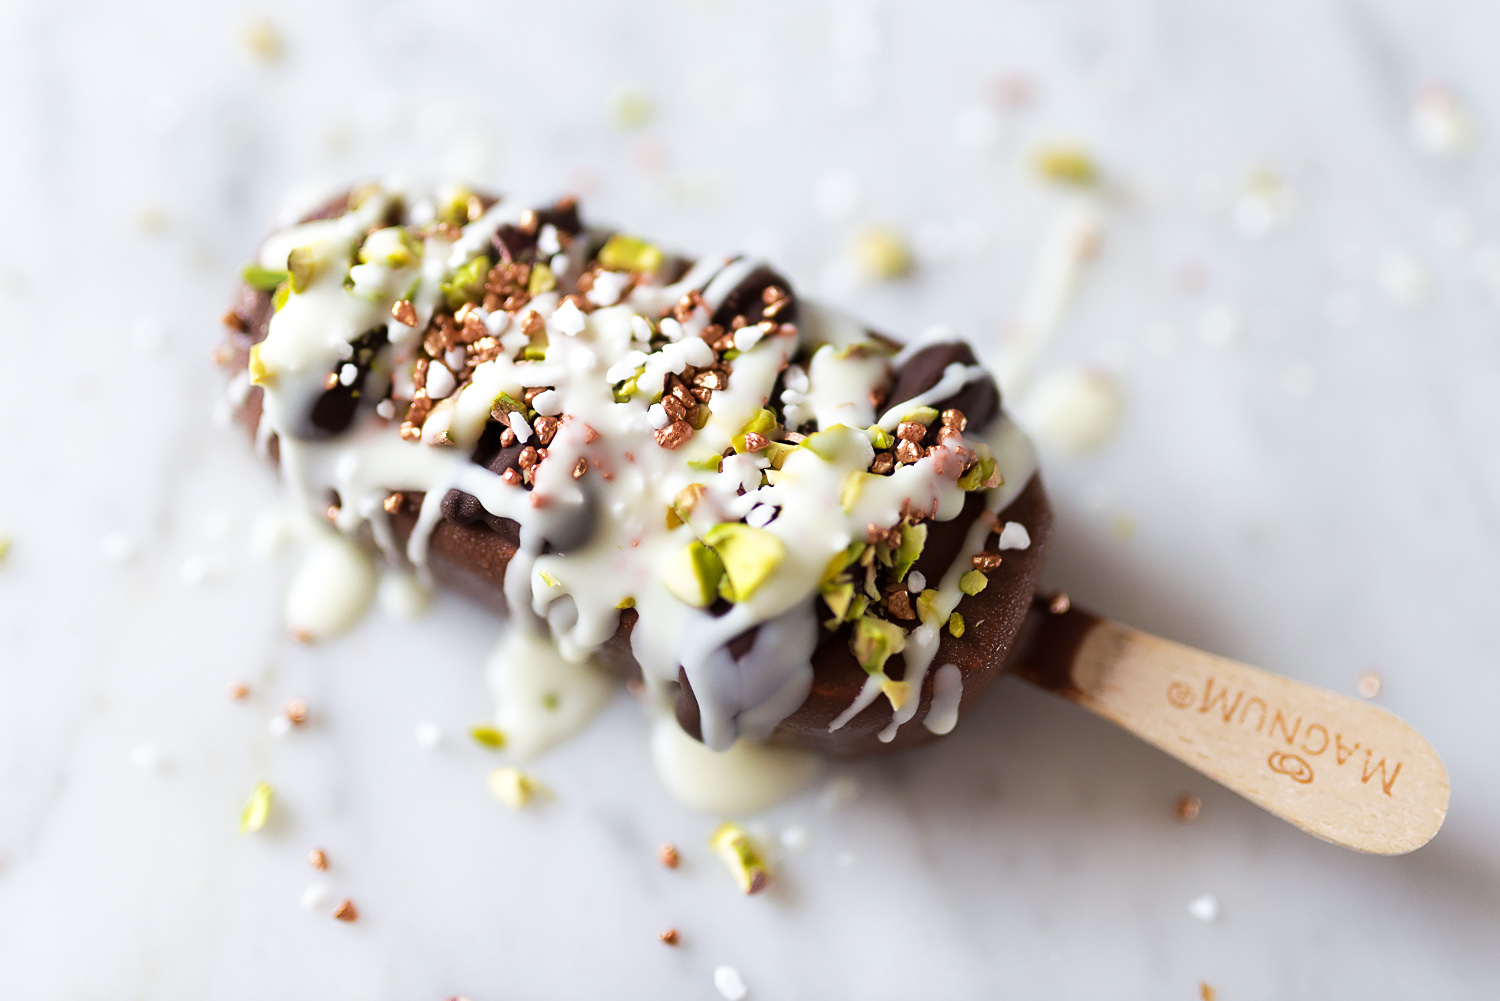 Create your own Dream Magnum Ice Cream with Toppings